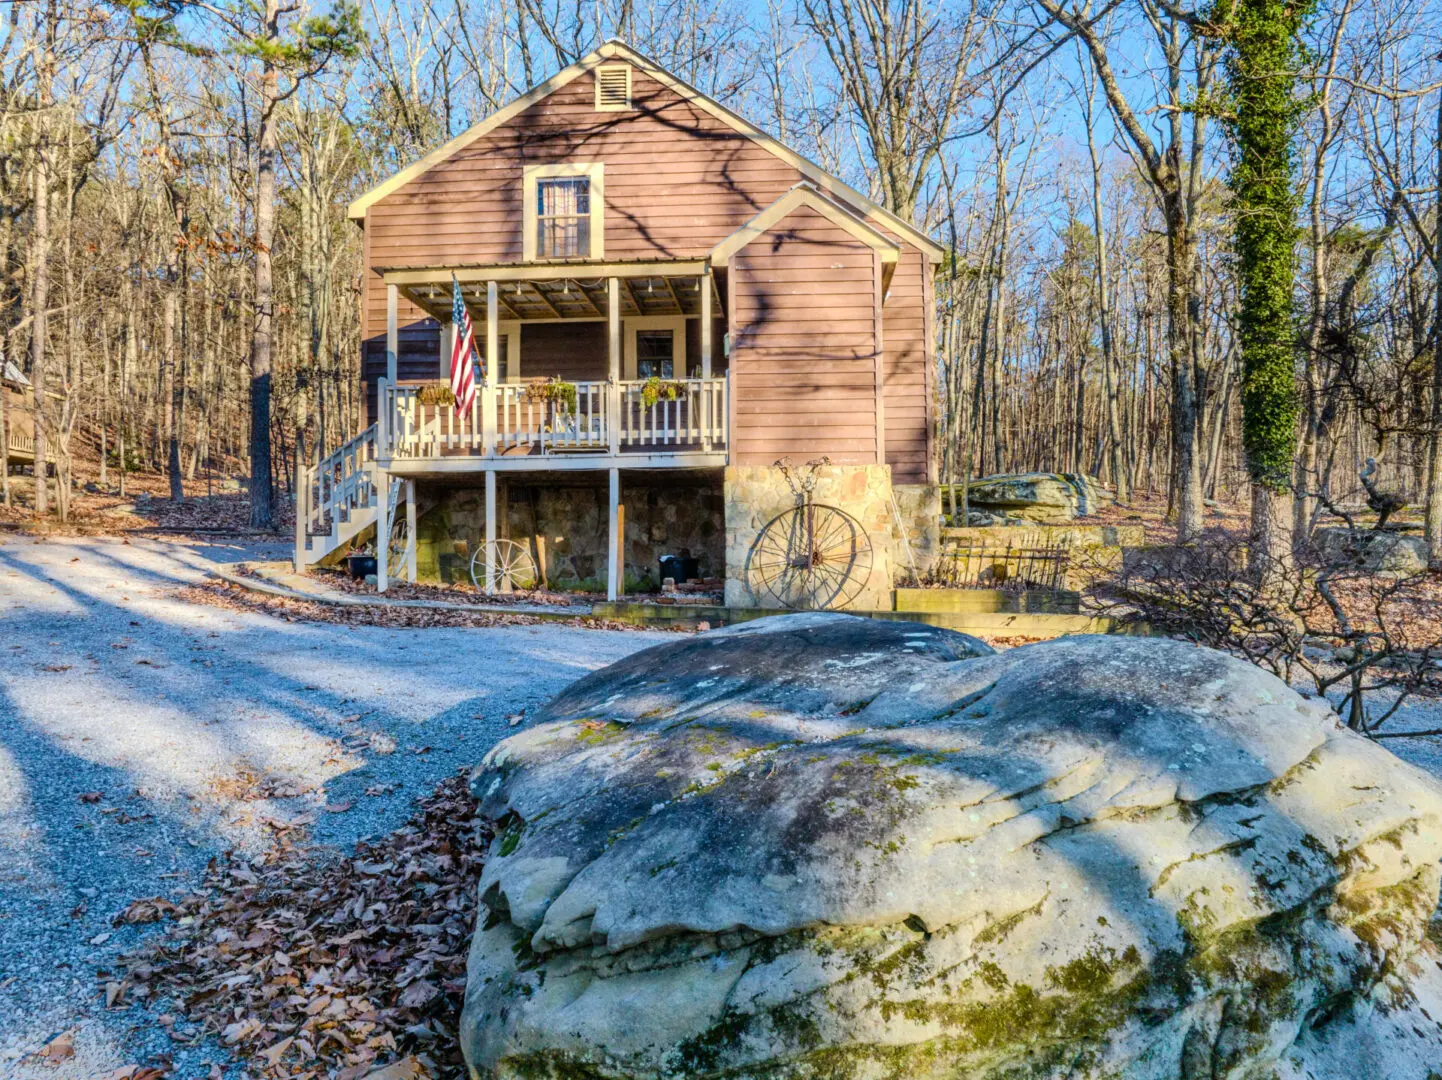 A serene vacation cabin nestled amongst the enchanting woods, with a rustic rock as its charming centerpiece.